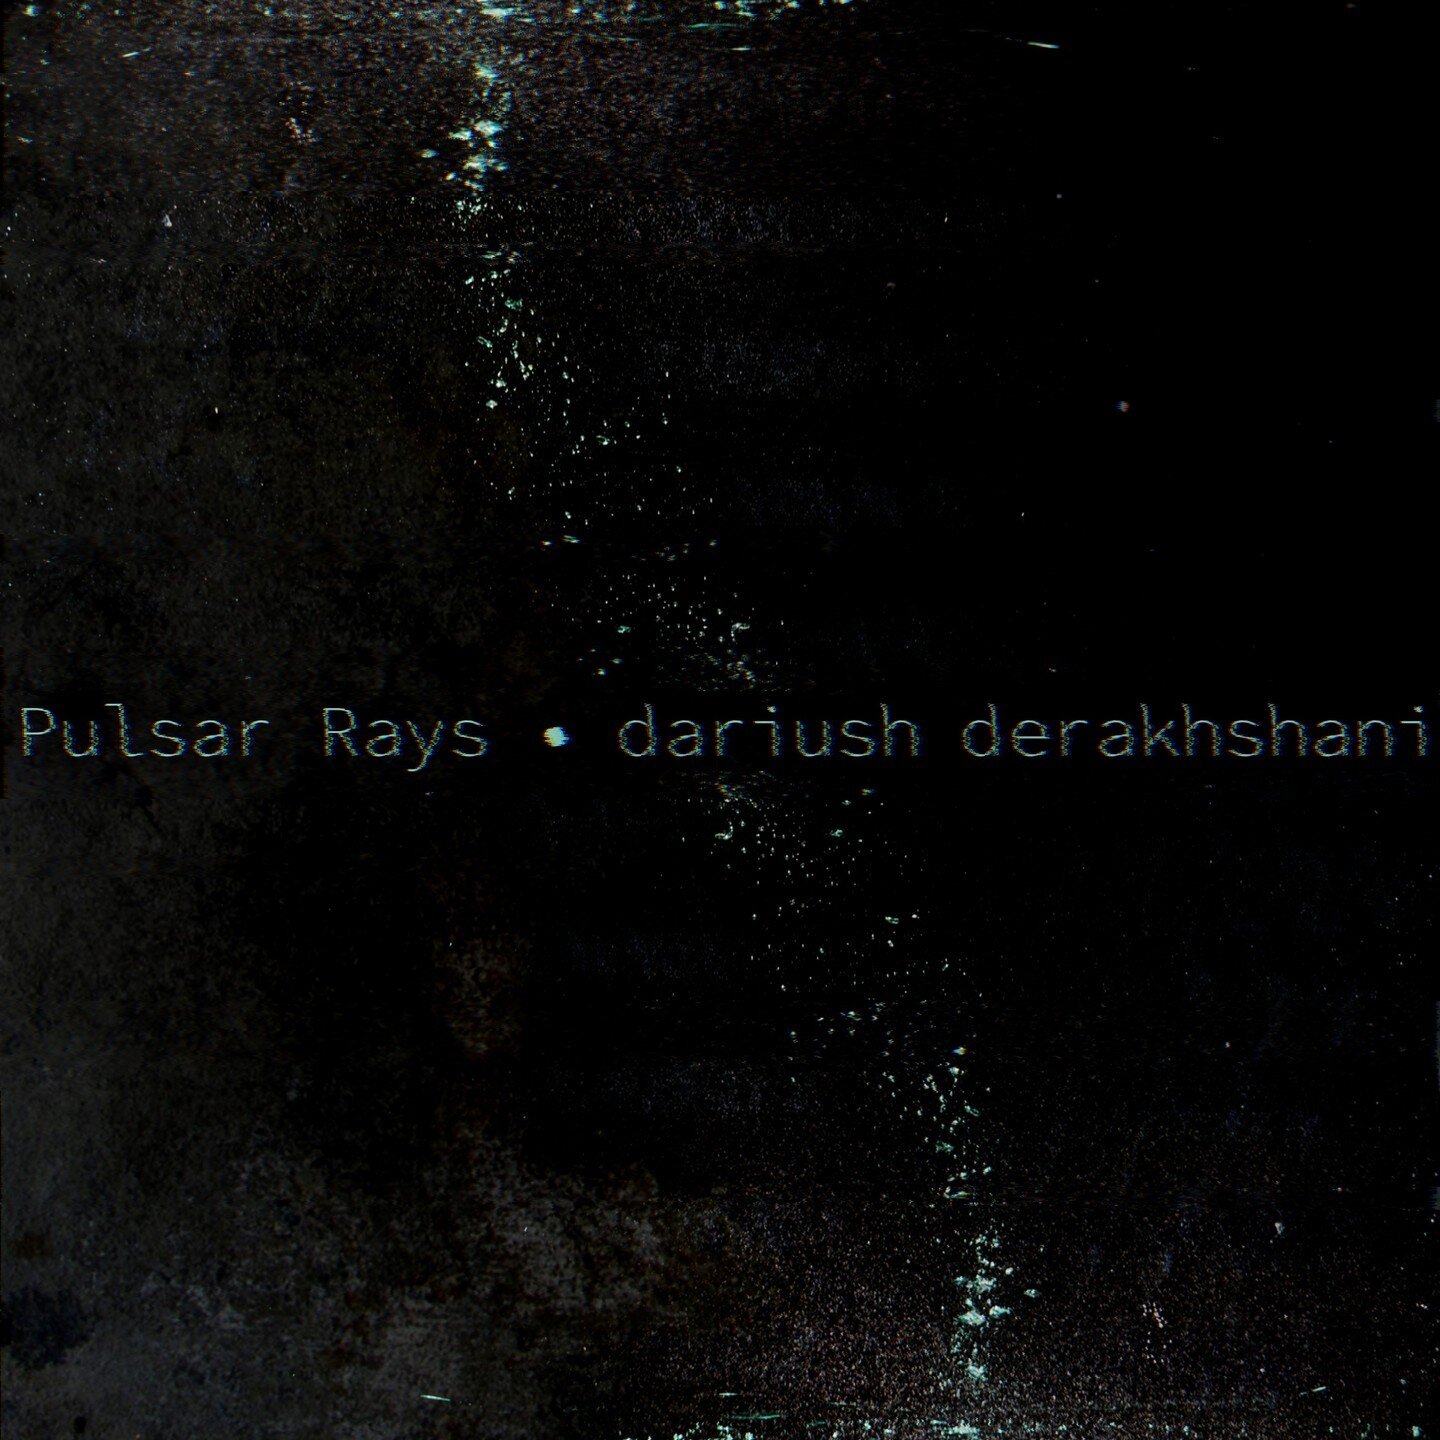 We are delighted to announce the release of PULSAR RAYS, a breathtakingly original work of acousmatic music from the daring mind of composer, Dariush Derakhshani. In two days, the single will be live on all commercial streaming platforms. Stay tuned!